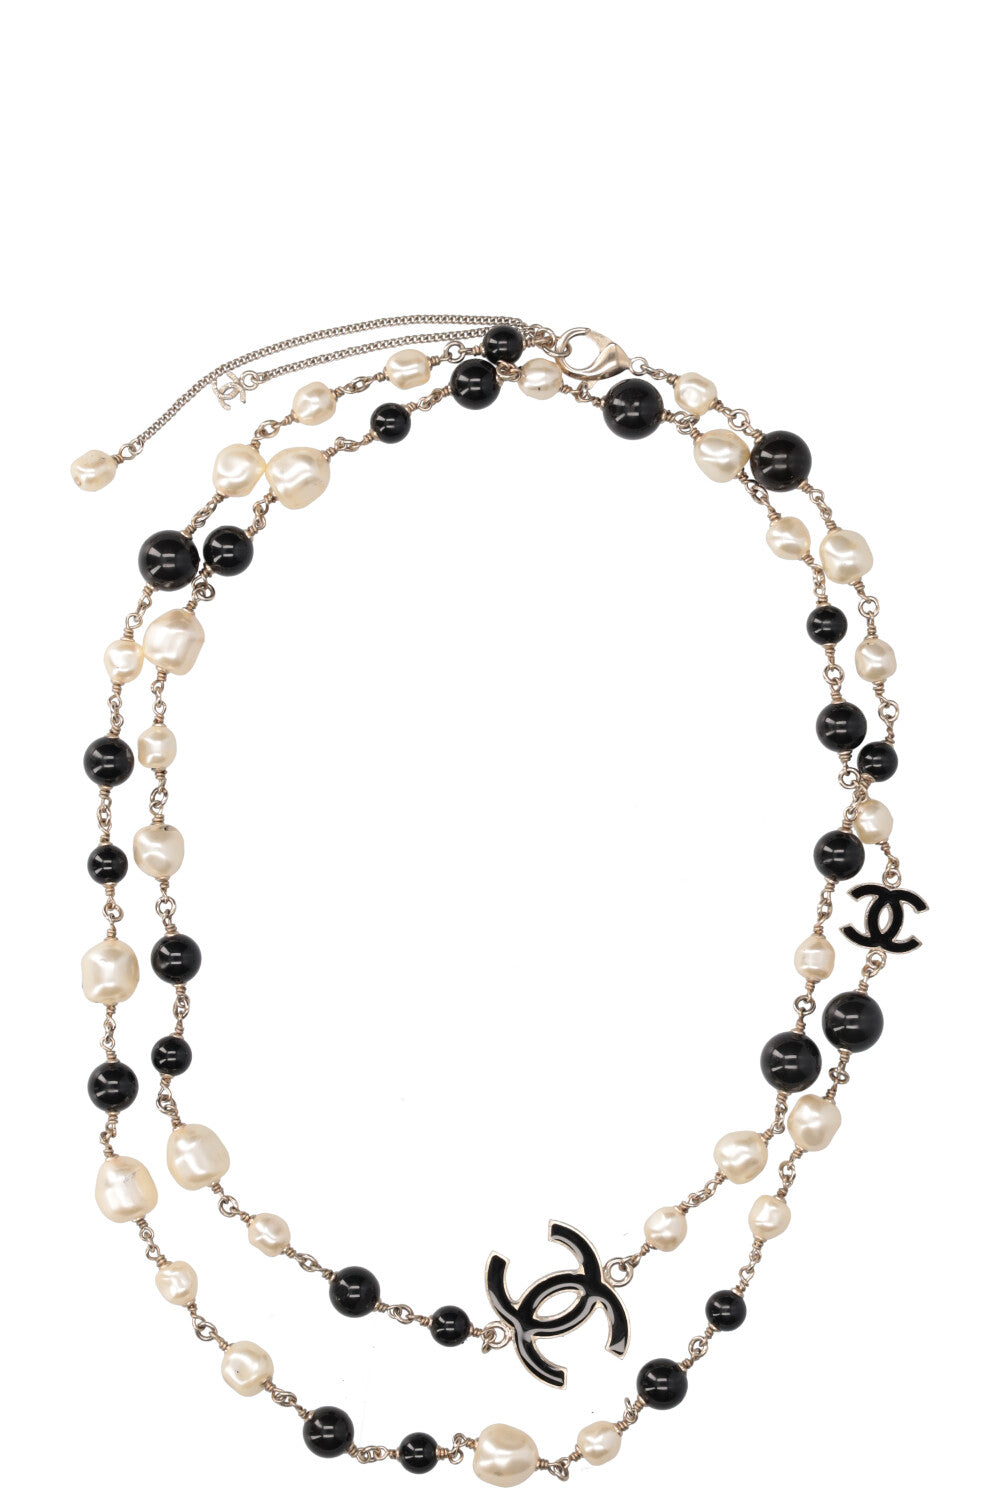 CHANEL Necklace Pearls Black White 2014